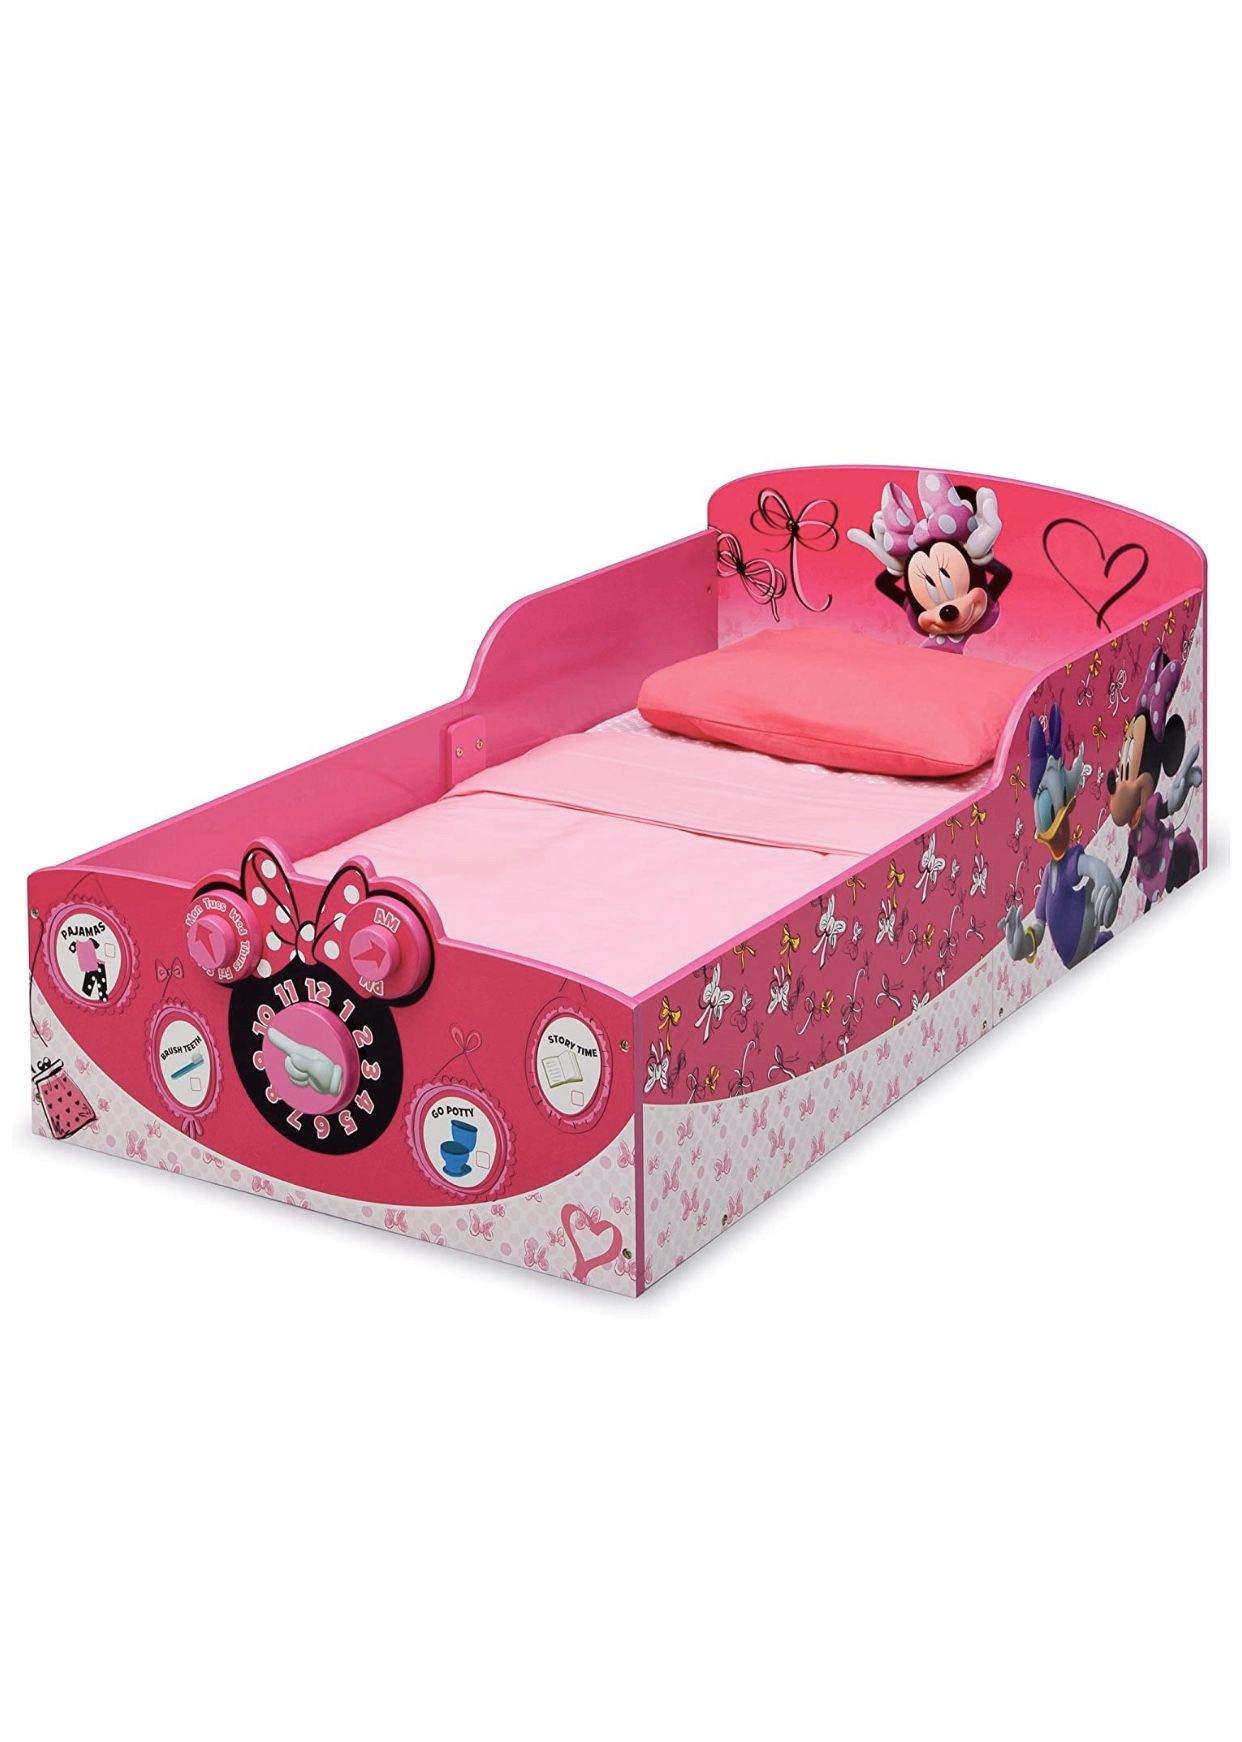 2 Disney Mickey Mouse toddler bed